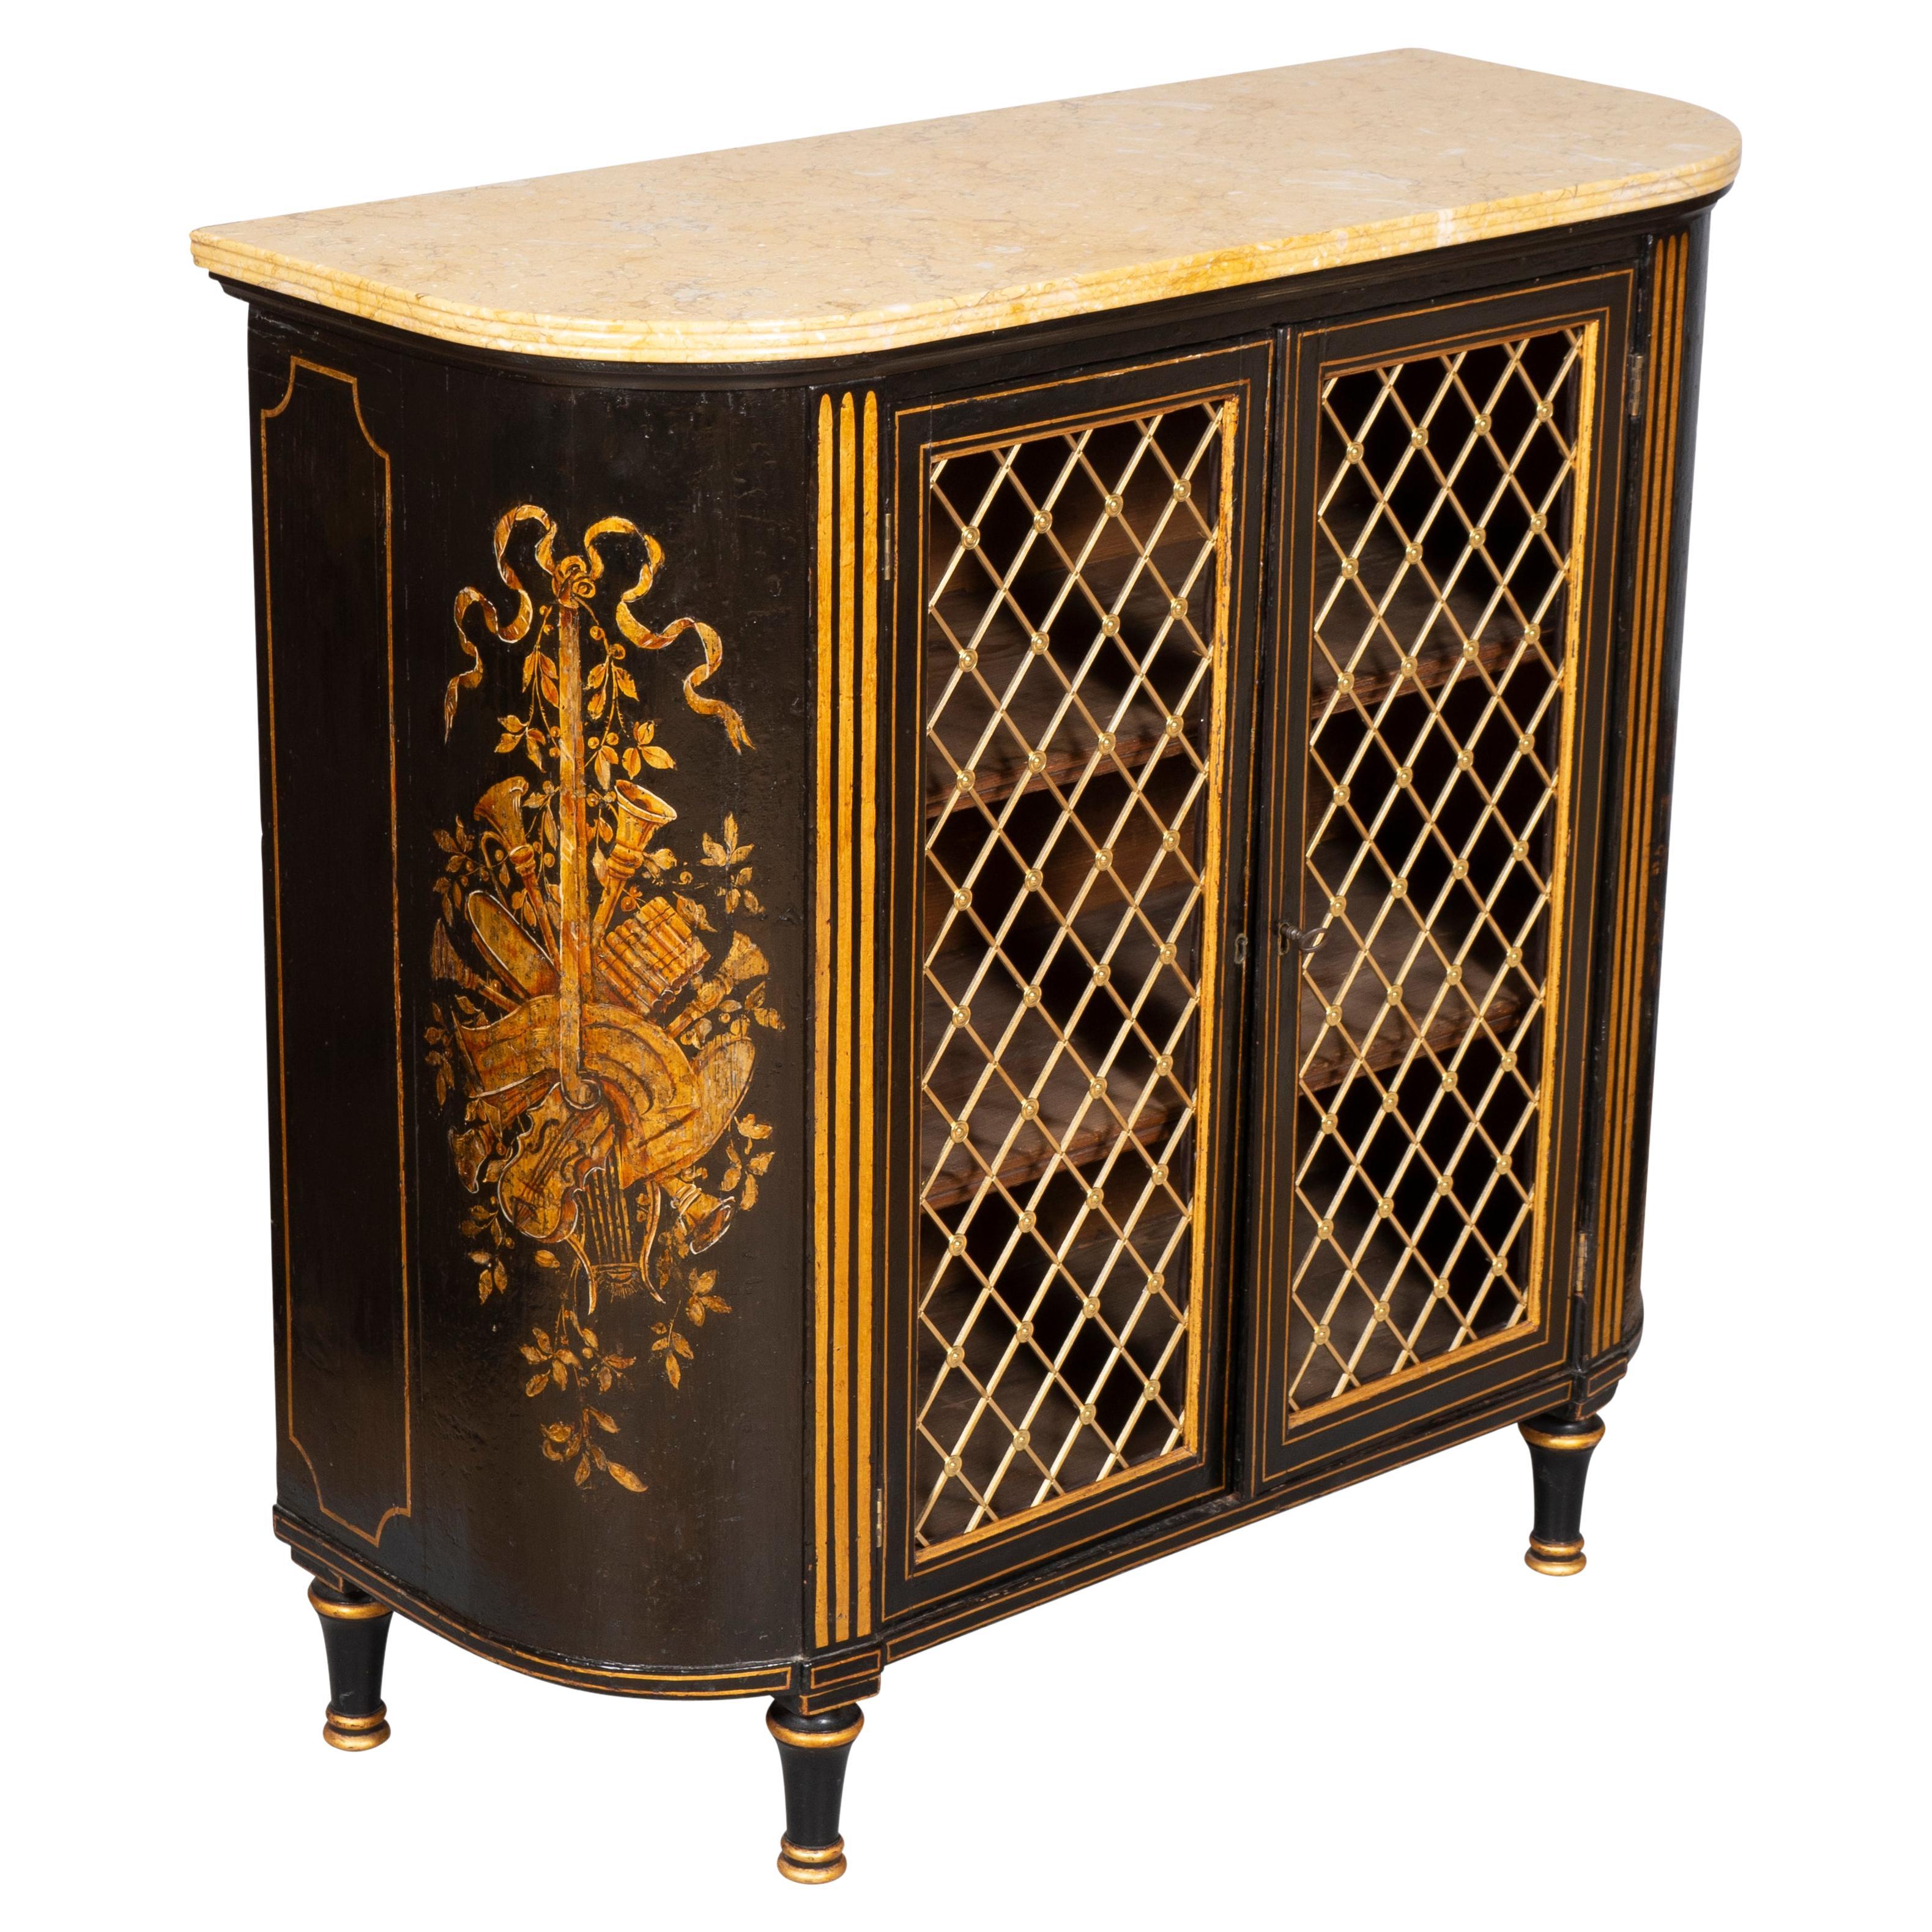 Elongated D shaped Sienna marble top with reeded edge over a conforming case with a pair of brass grill cabinet doors enclosing two shelves. The sides decorated with subtle gilded musical trophies. Ending on circular tapered legs.